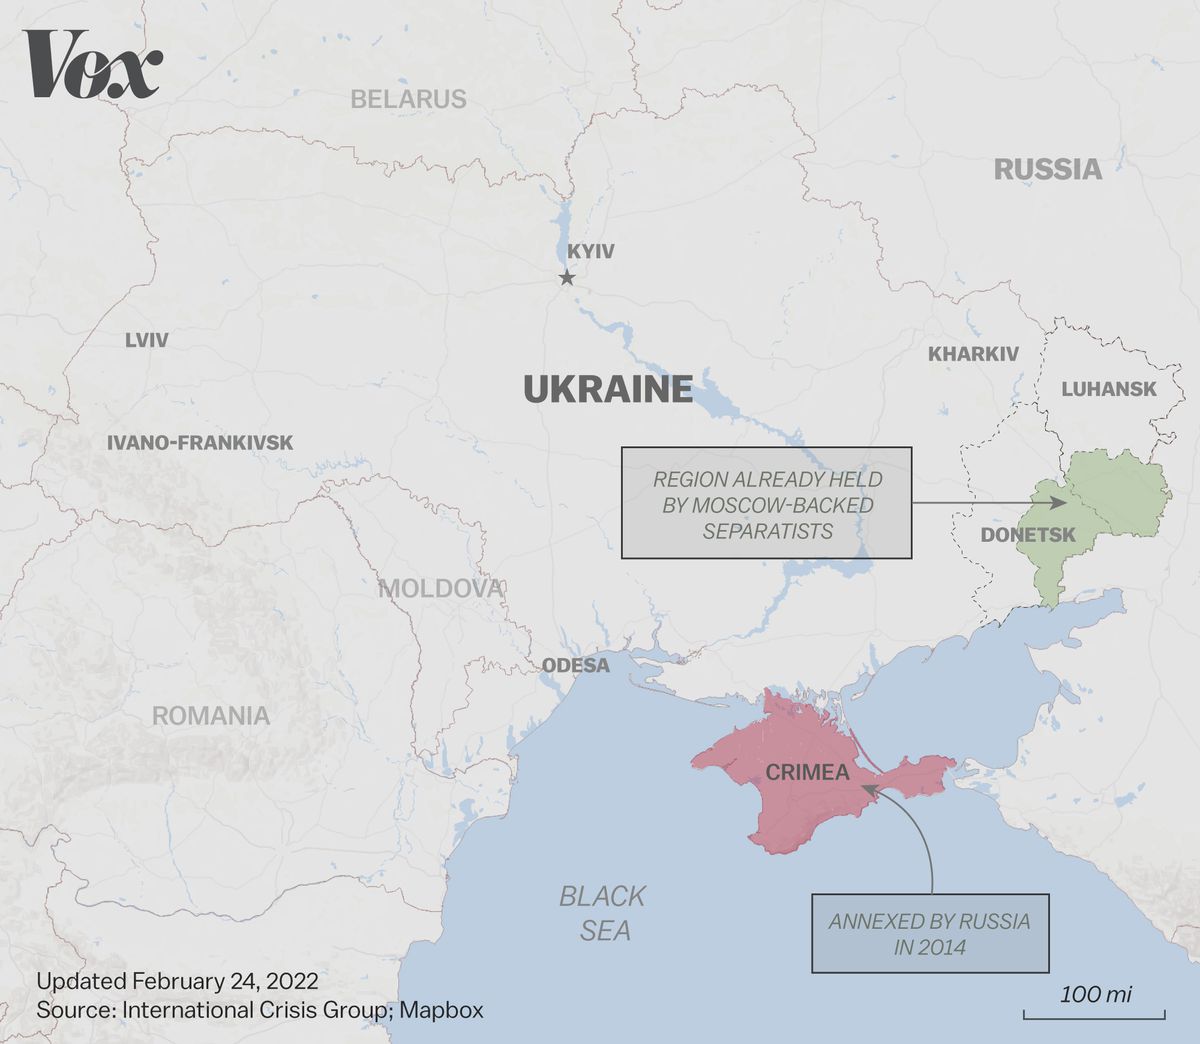 A map of Ukraine and surrounding countries, including areas already annexed by Russia.